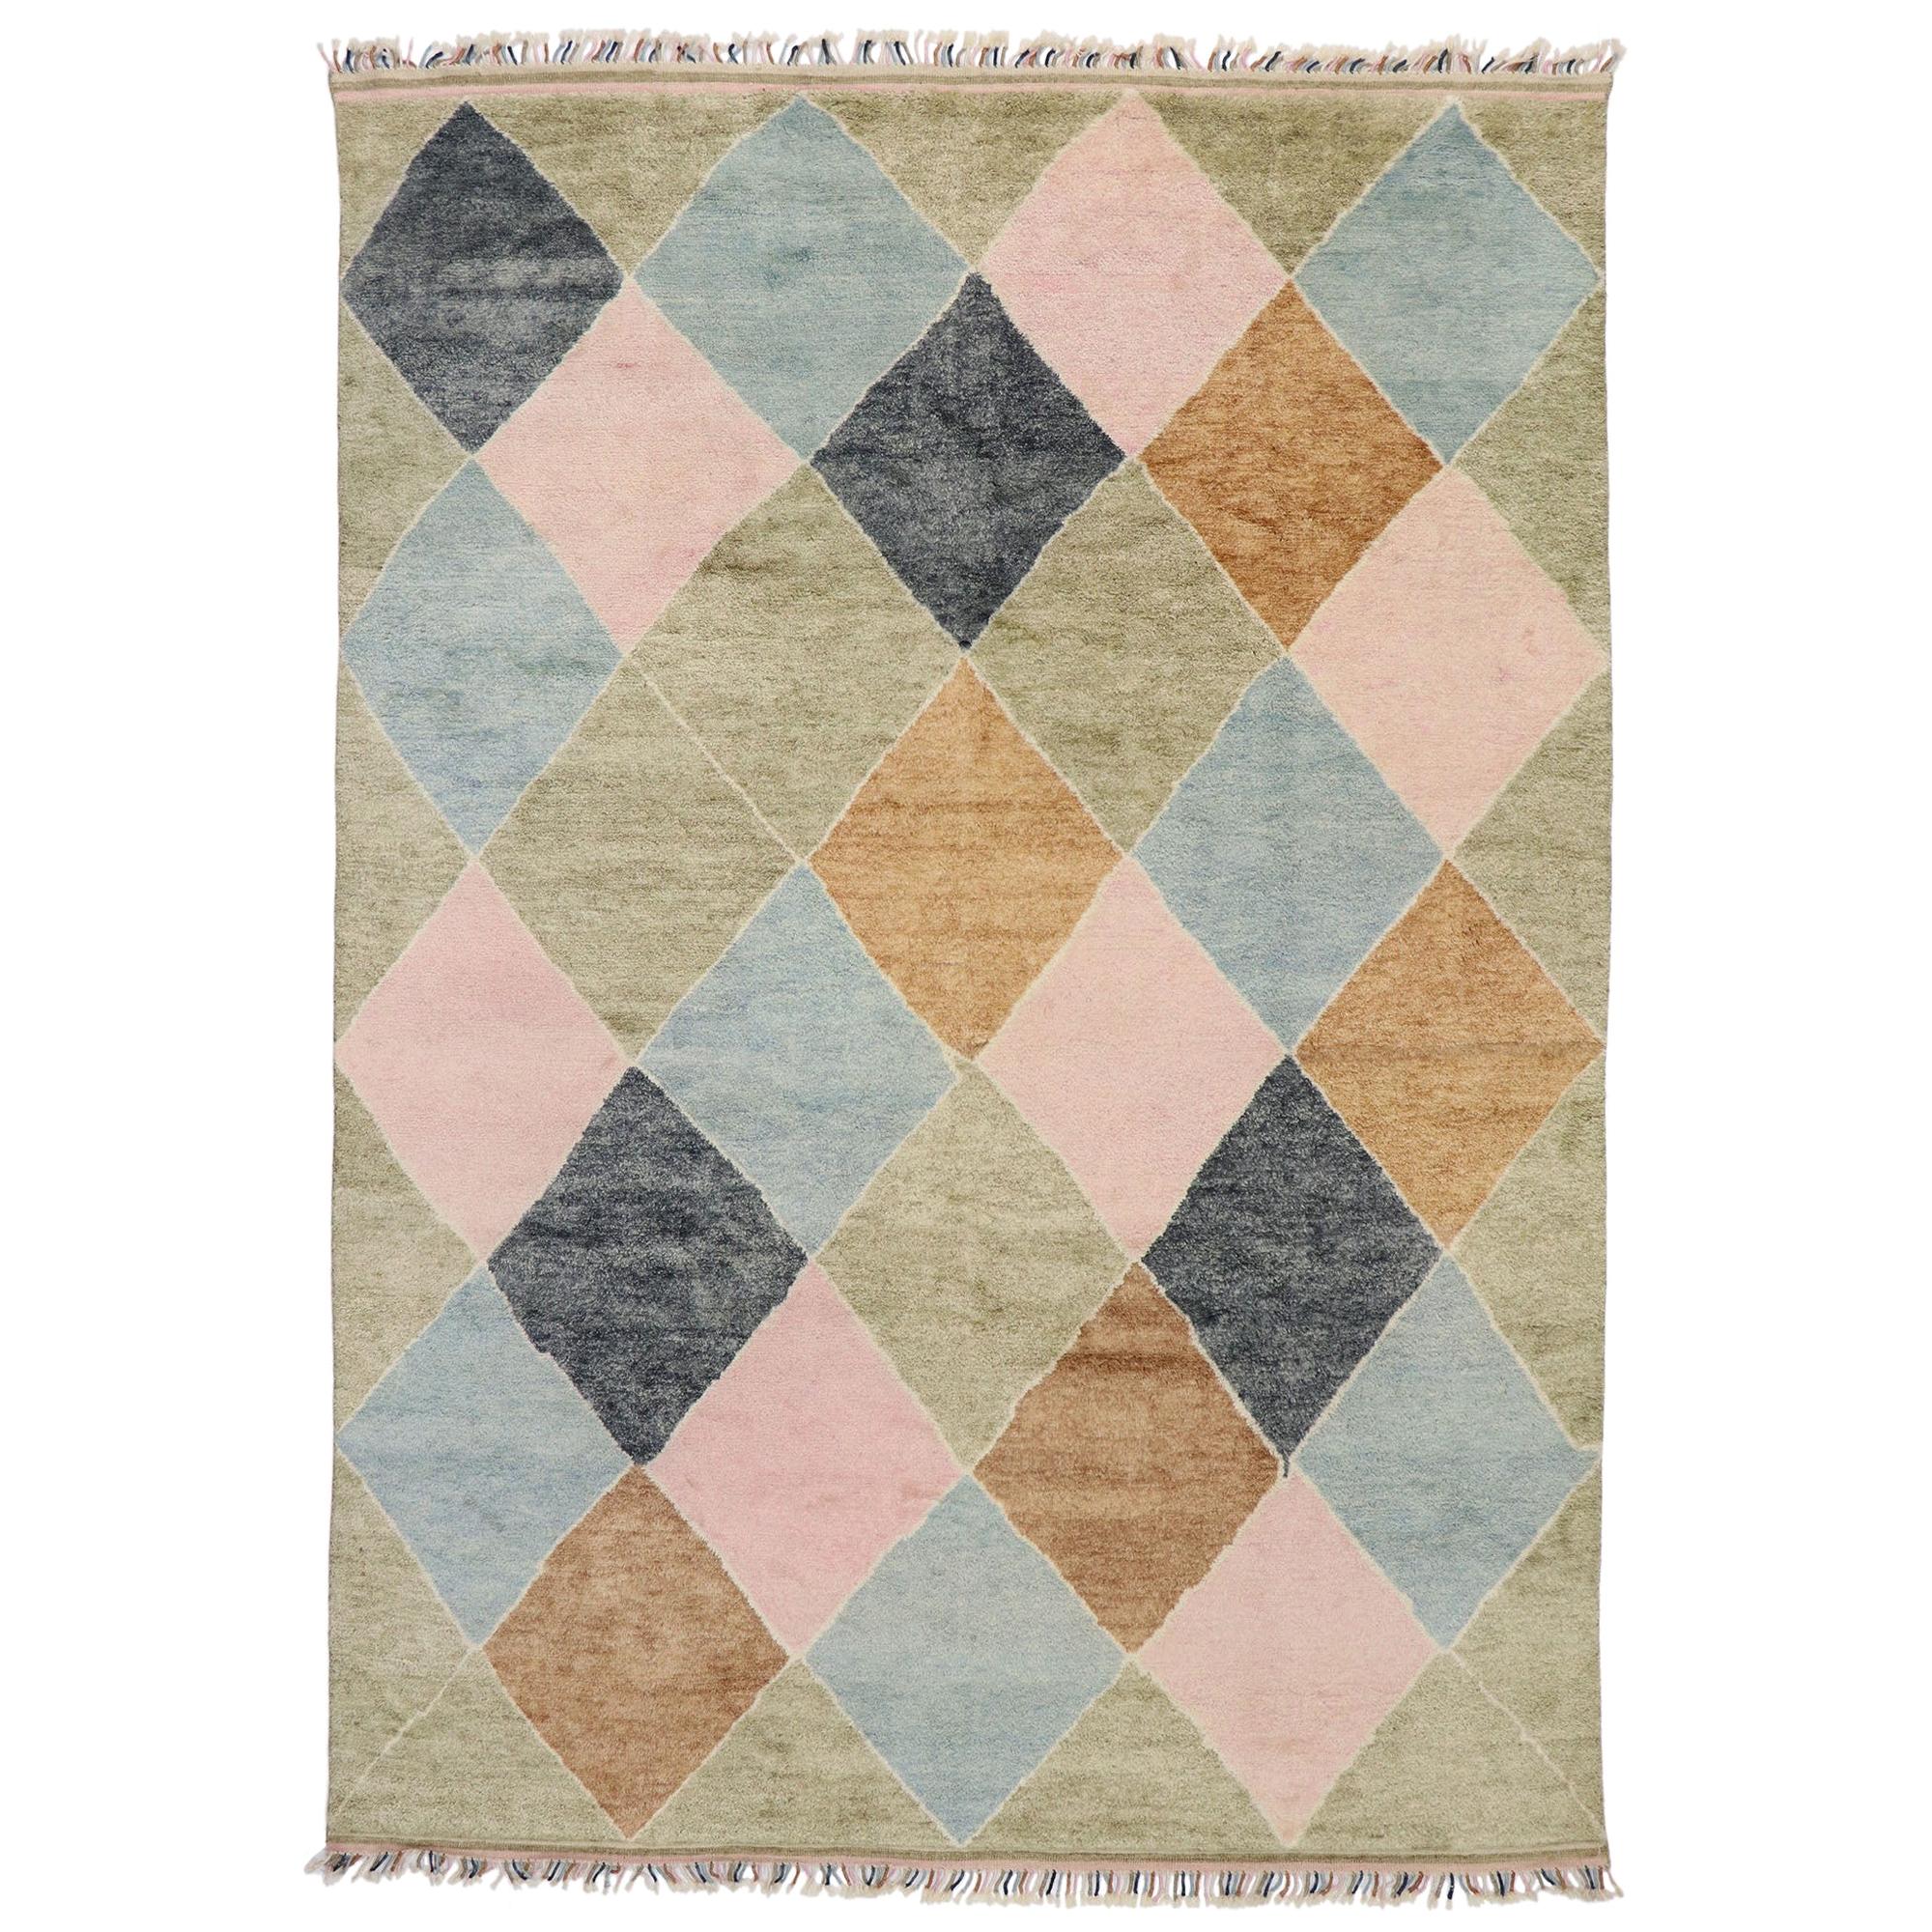 Modern Moroccan Area Rug, Preppy Argyle Meets Boho Chic For Sale